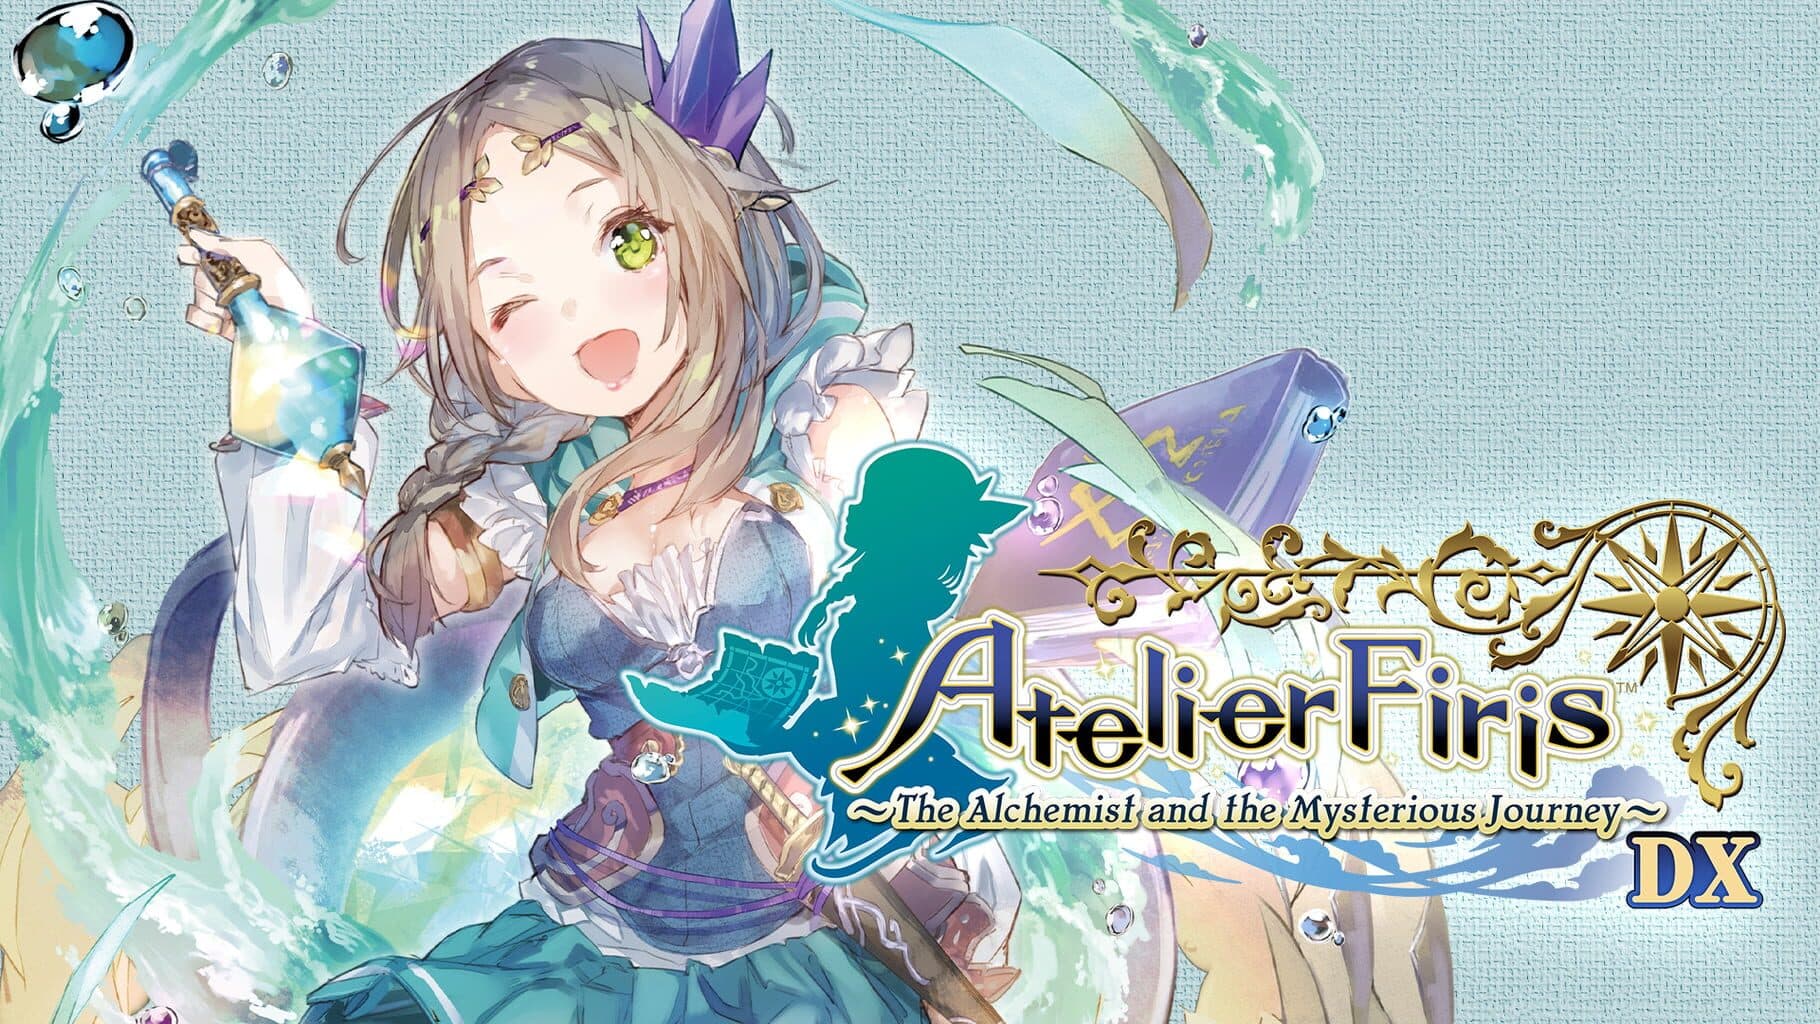 Atelier Firis: The Alchemist and the Mysterious Journey DX Image